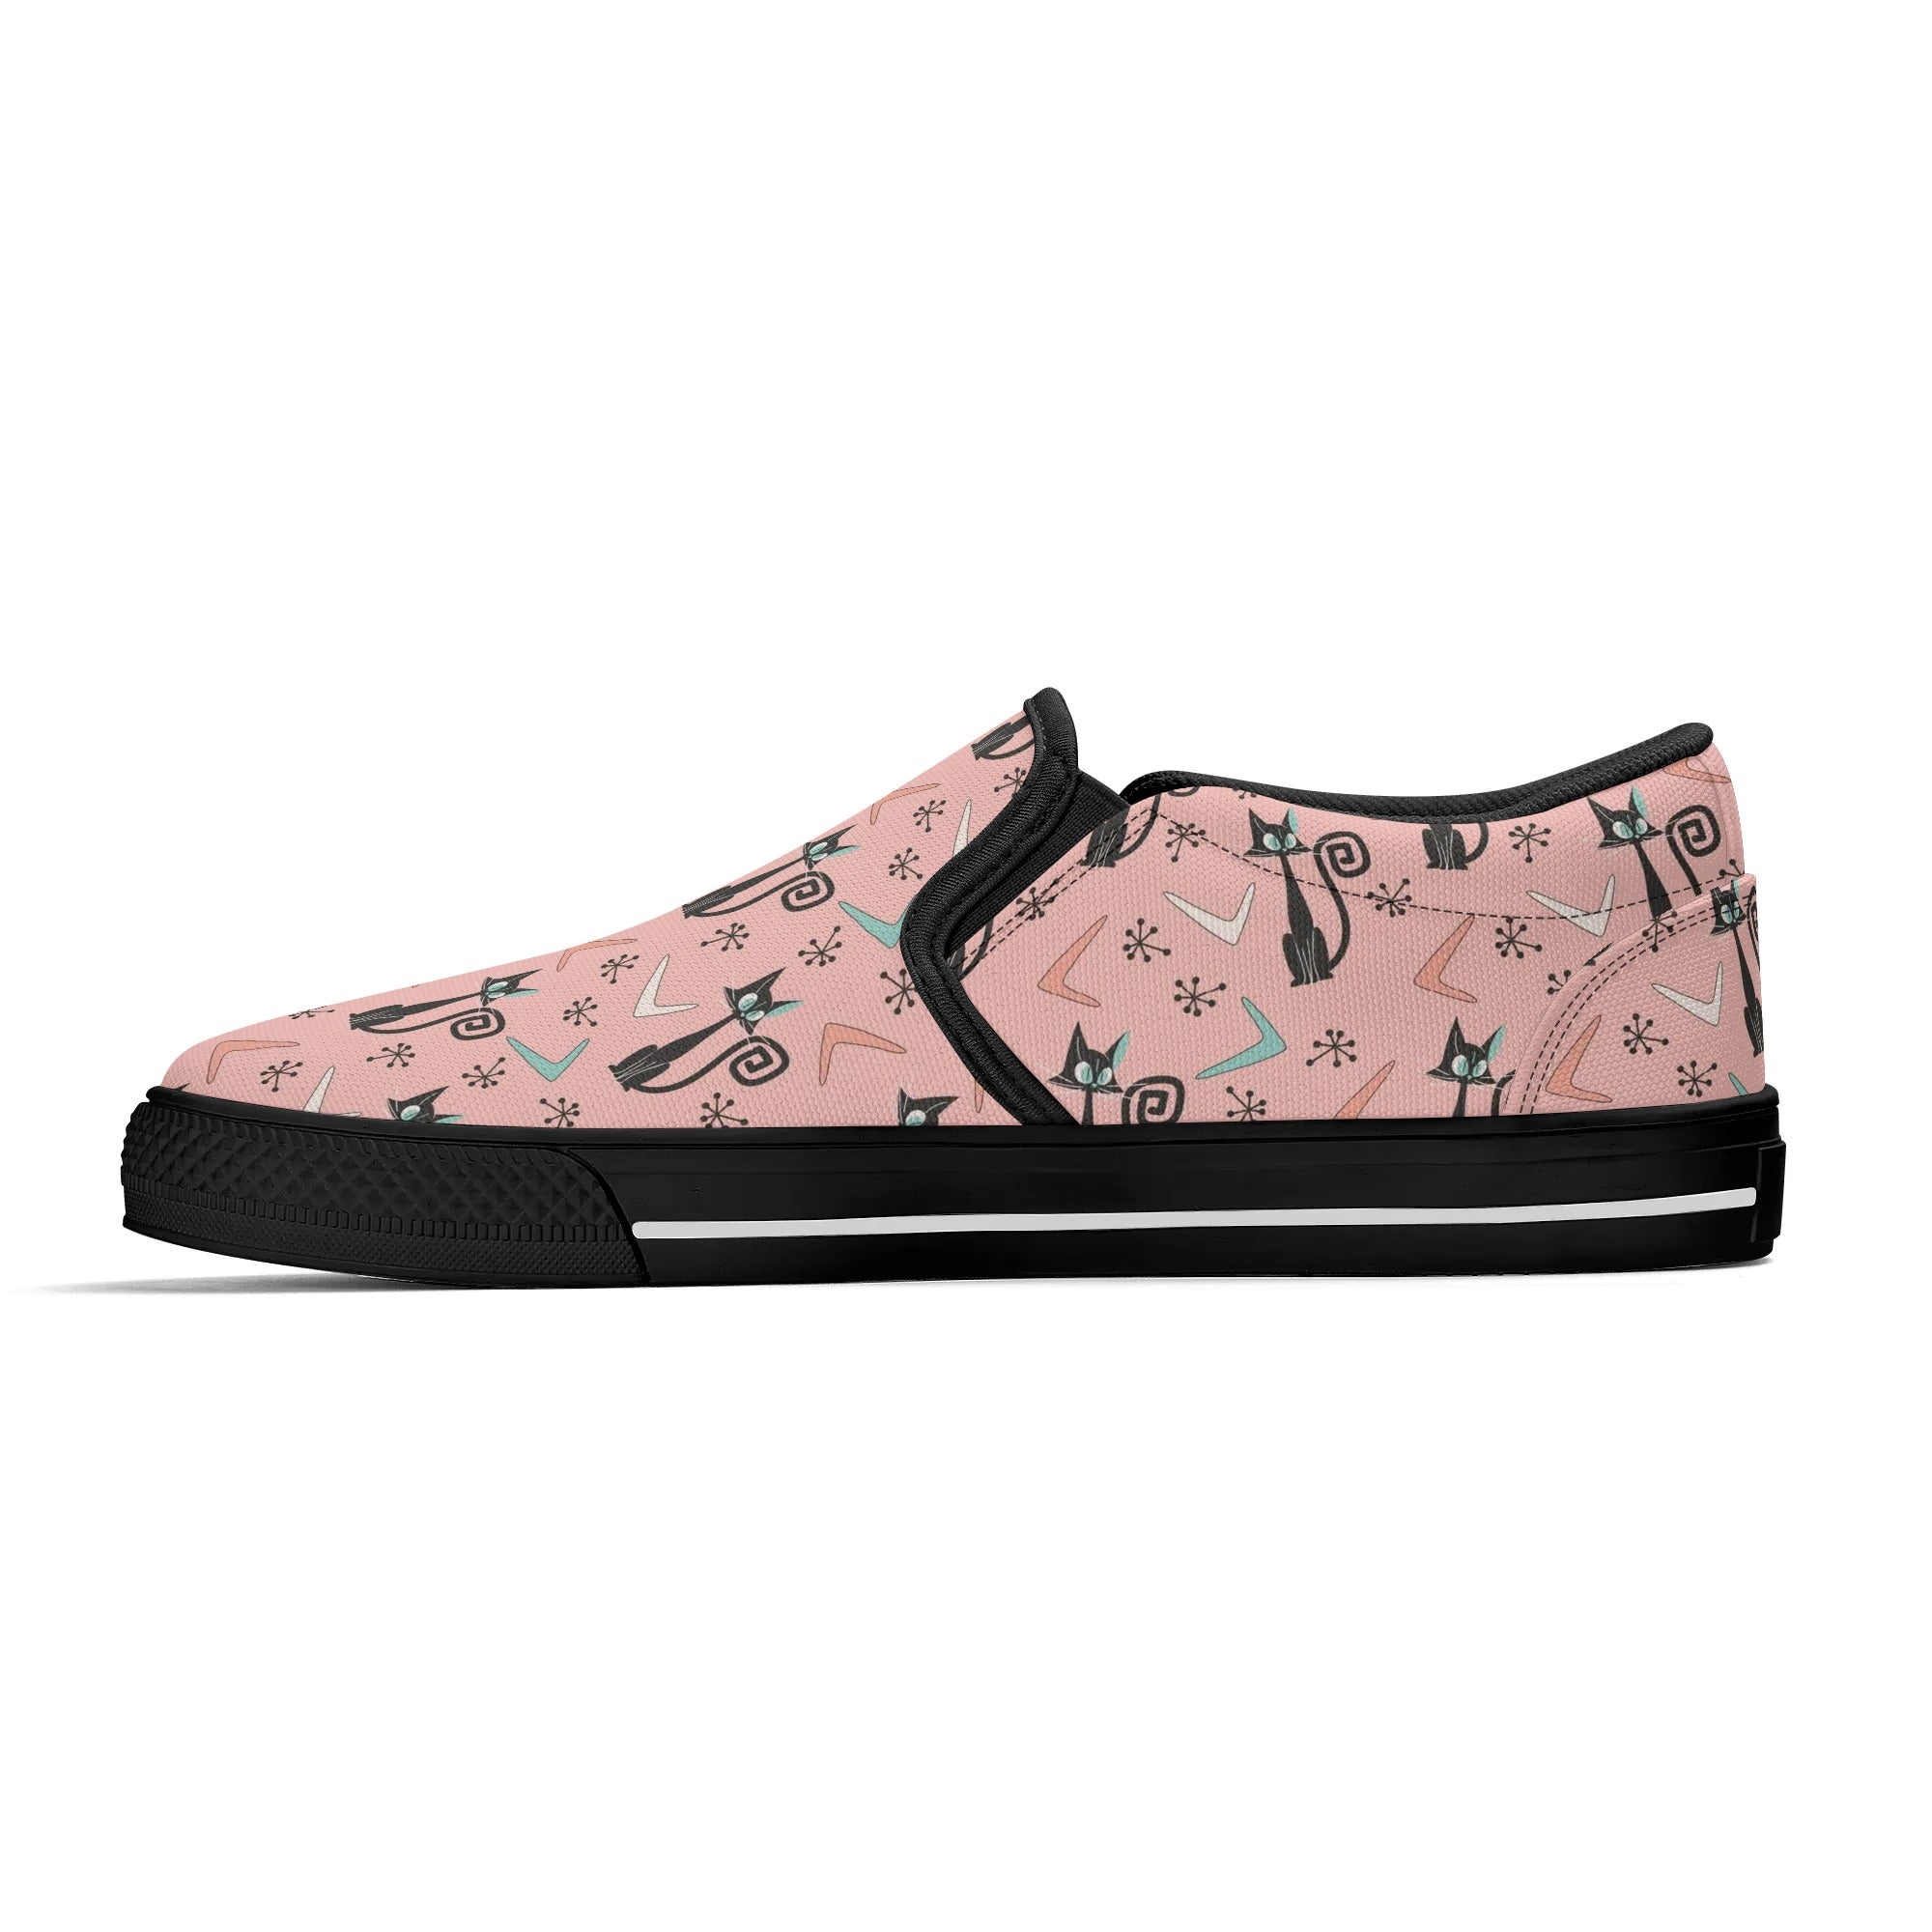 Atomic Kittie Kitschy Cat, Mid Mod Womens  Slip On Loafer Shoes